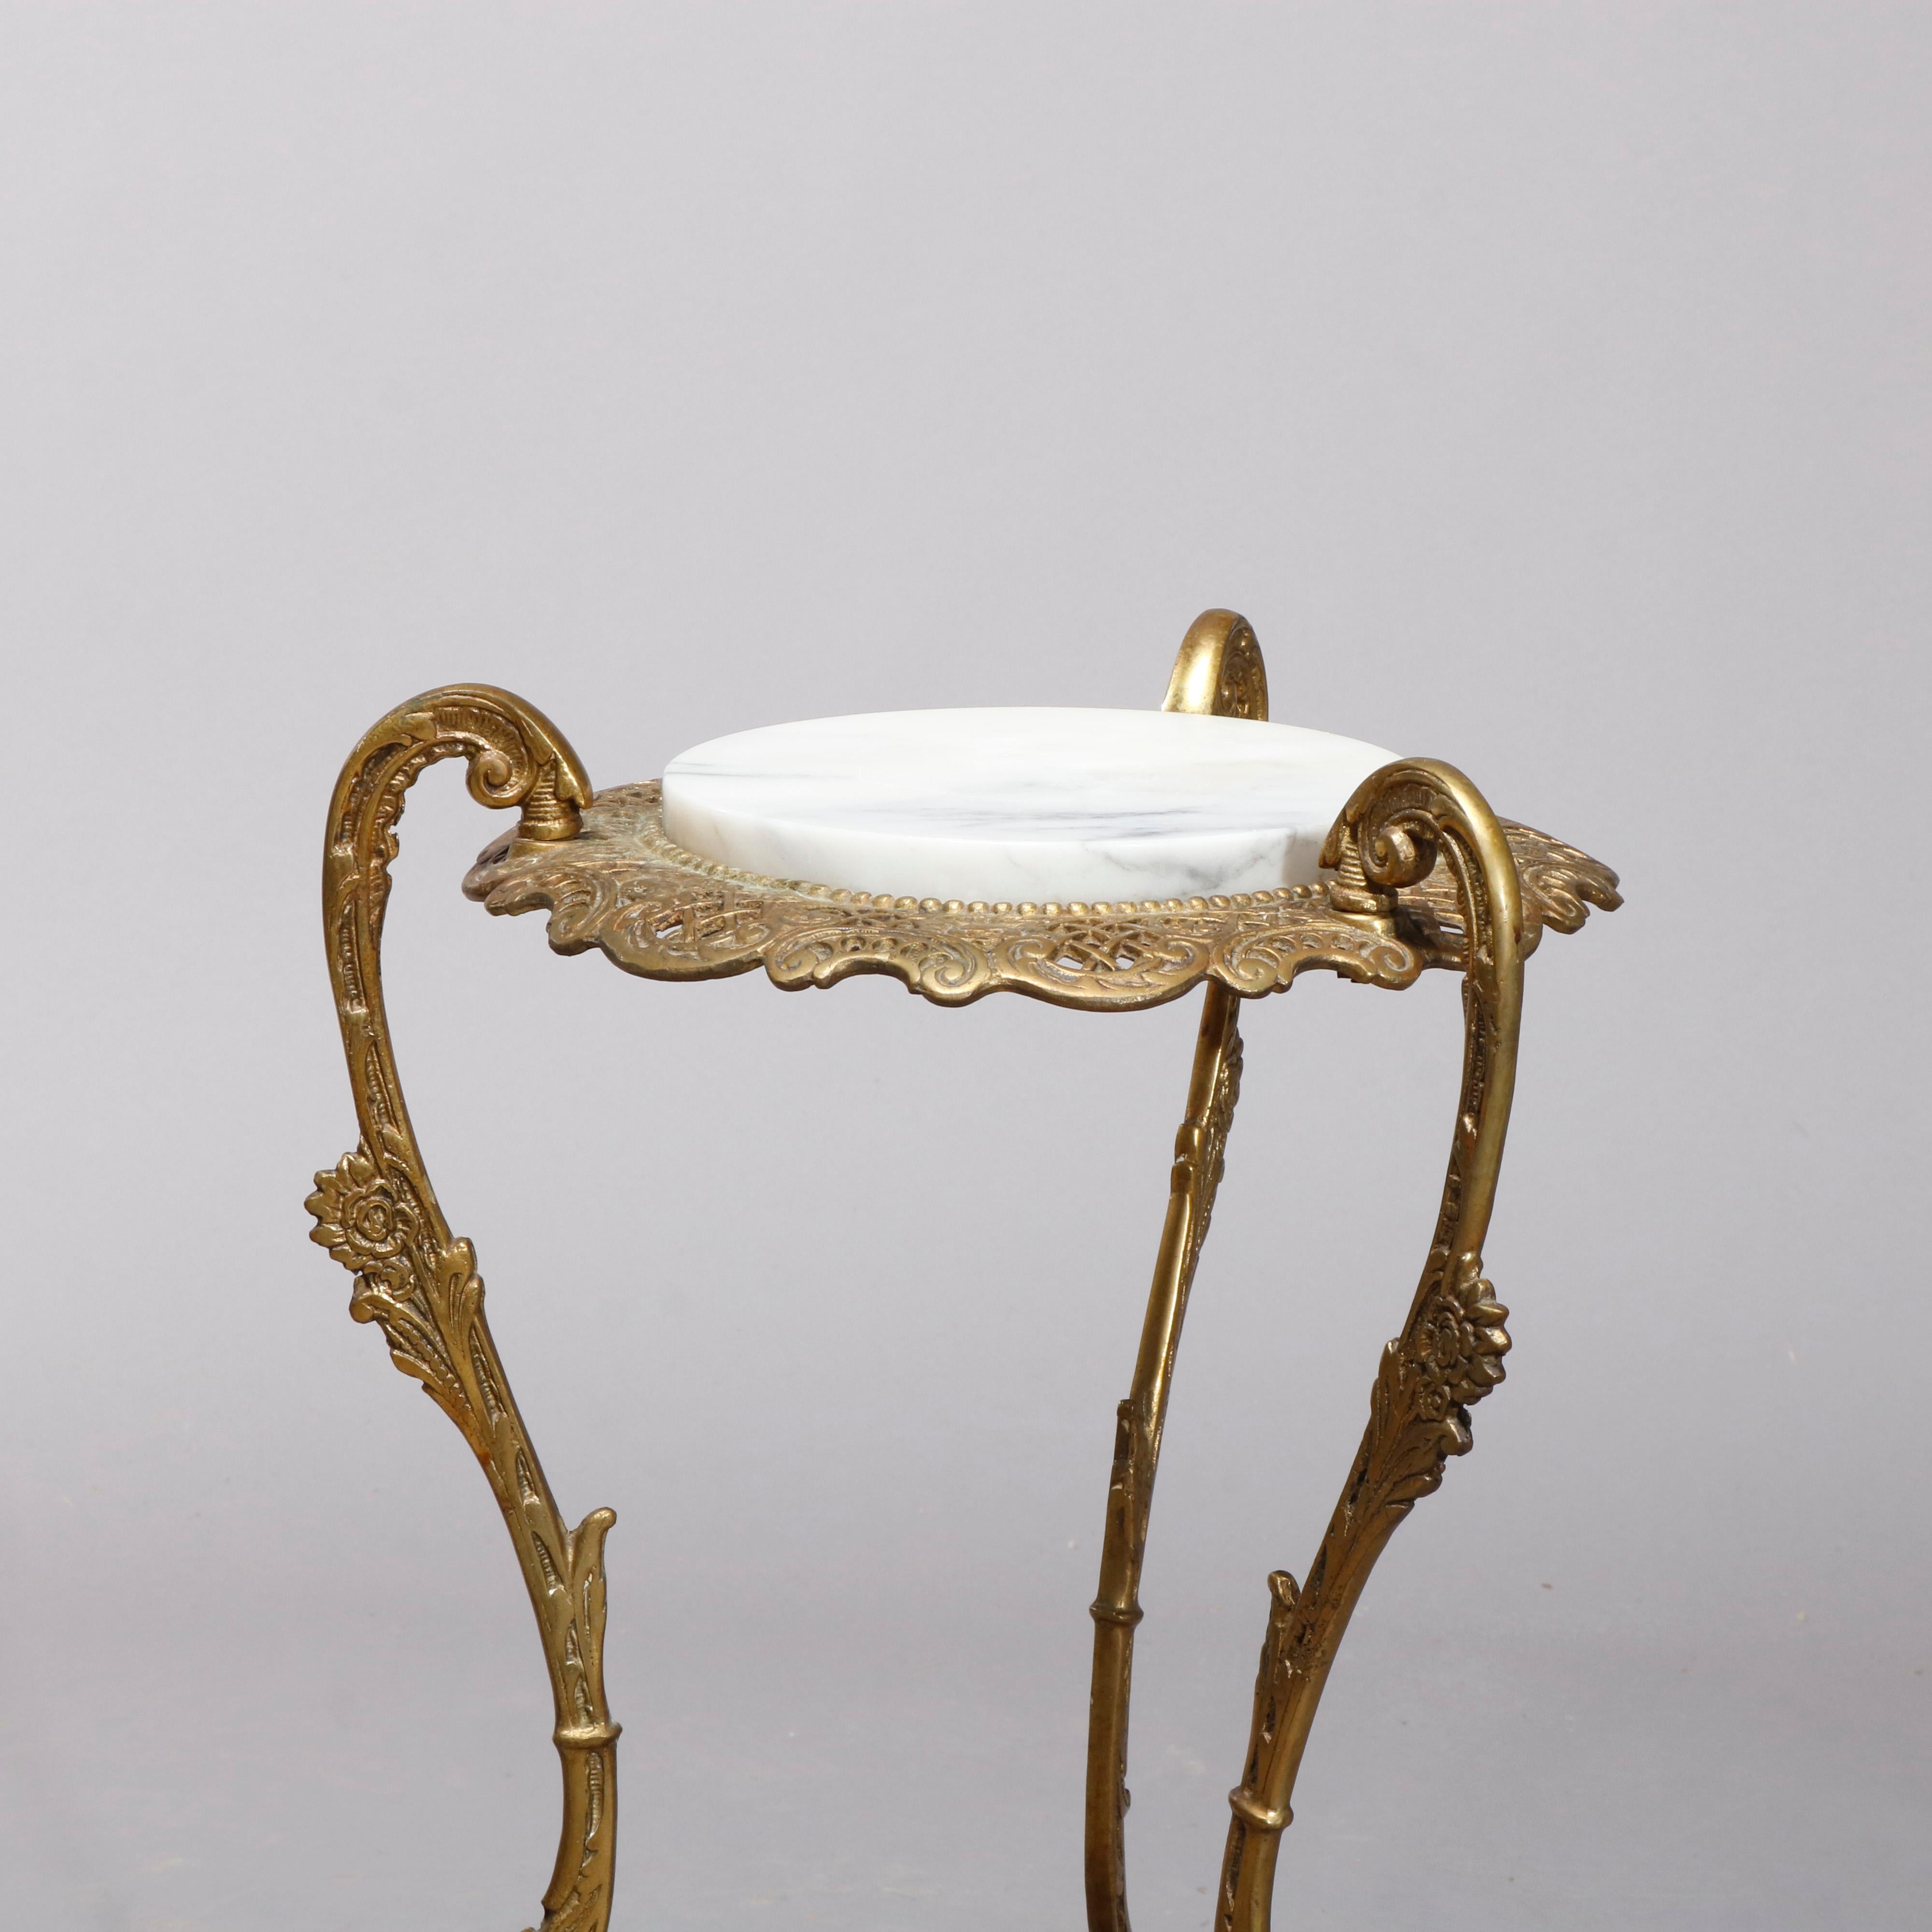 An antique French Louis XIV fern stand offers marble top surmounting gilt bronze base having pierced foliate frame raised on three foliate form cabriole legs with lower display, circa 1900.

Measures: 29.5